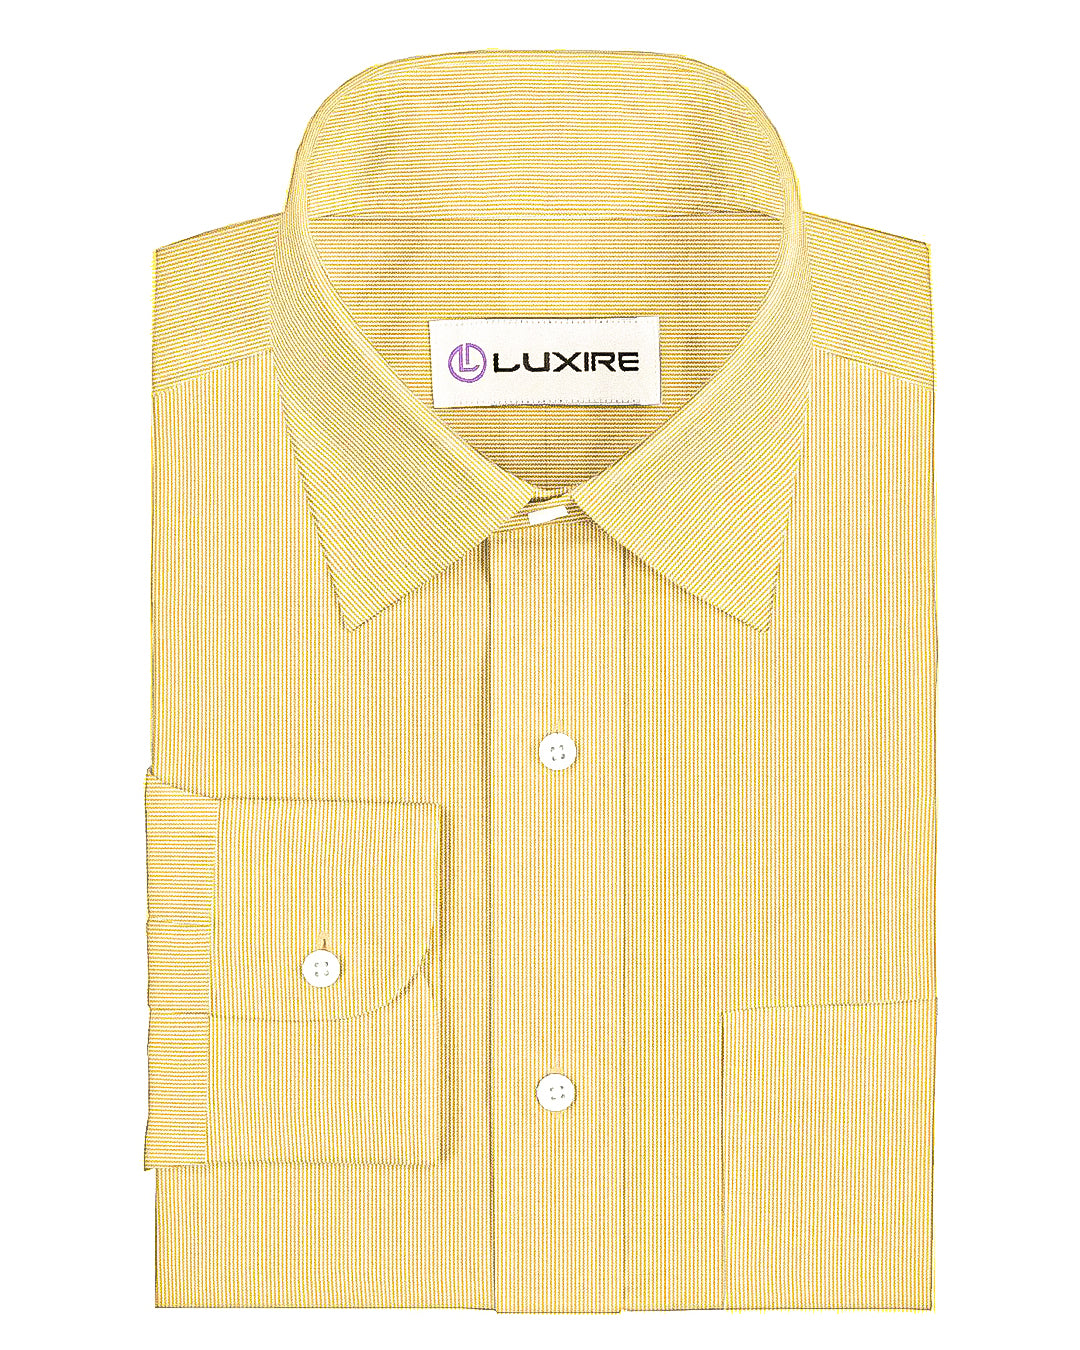 Front of the custom linen shirt for men in light ecru dress stripes by Luxire Clothing